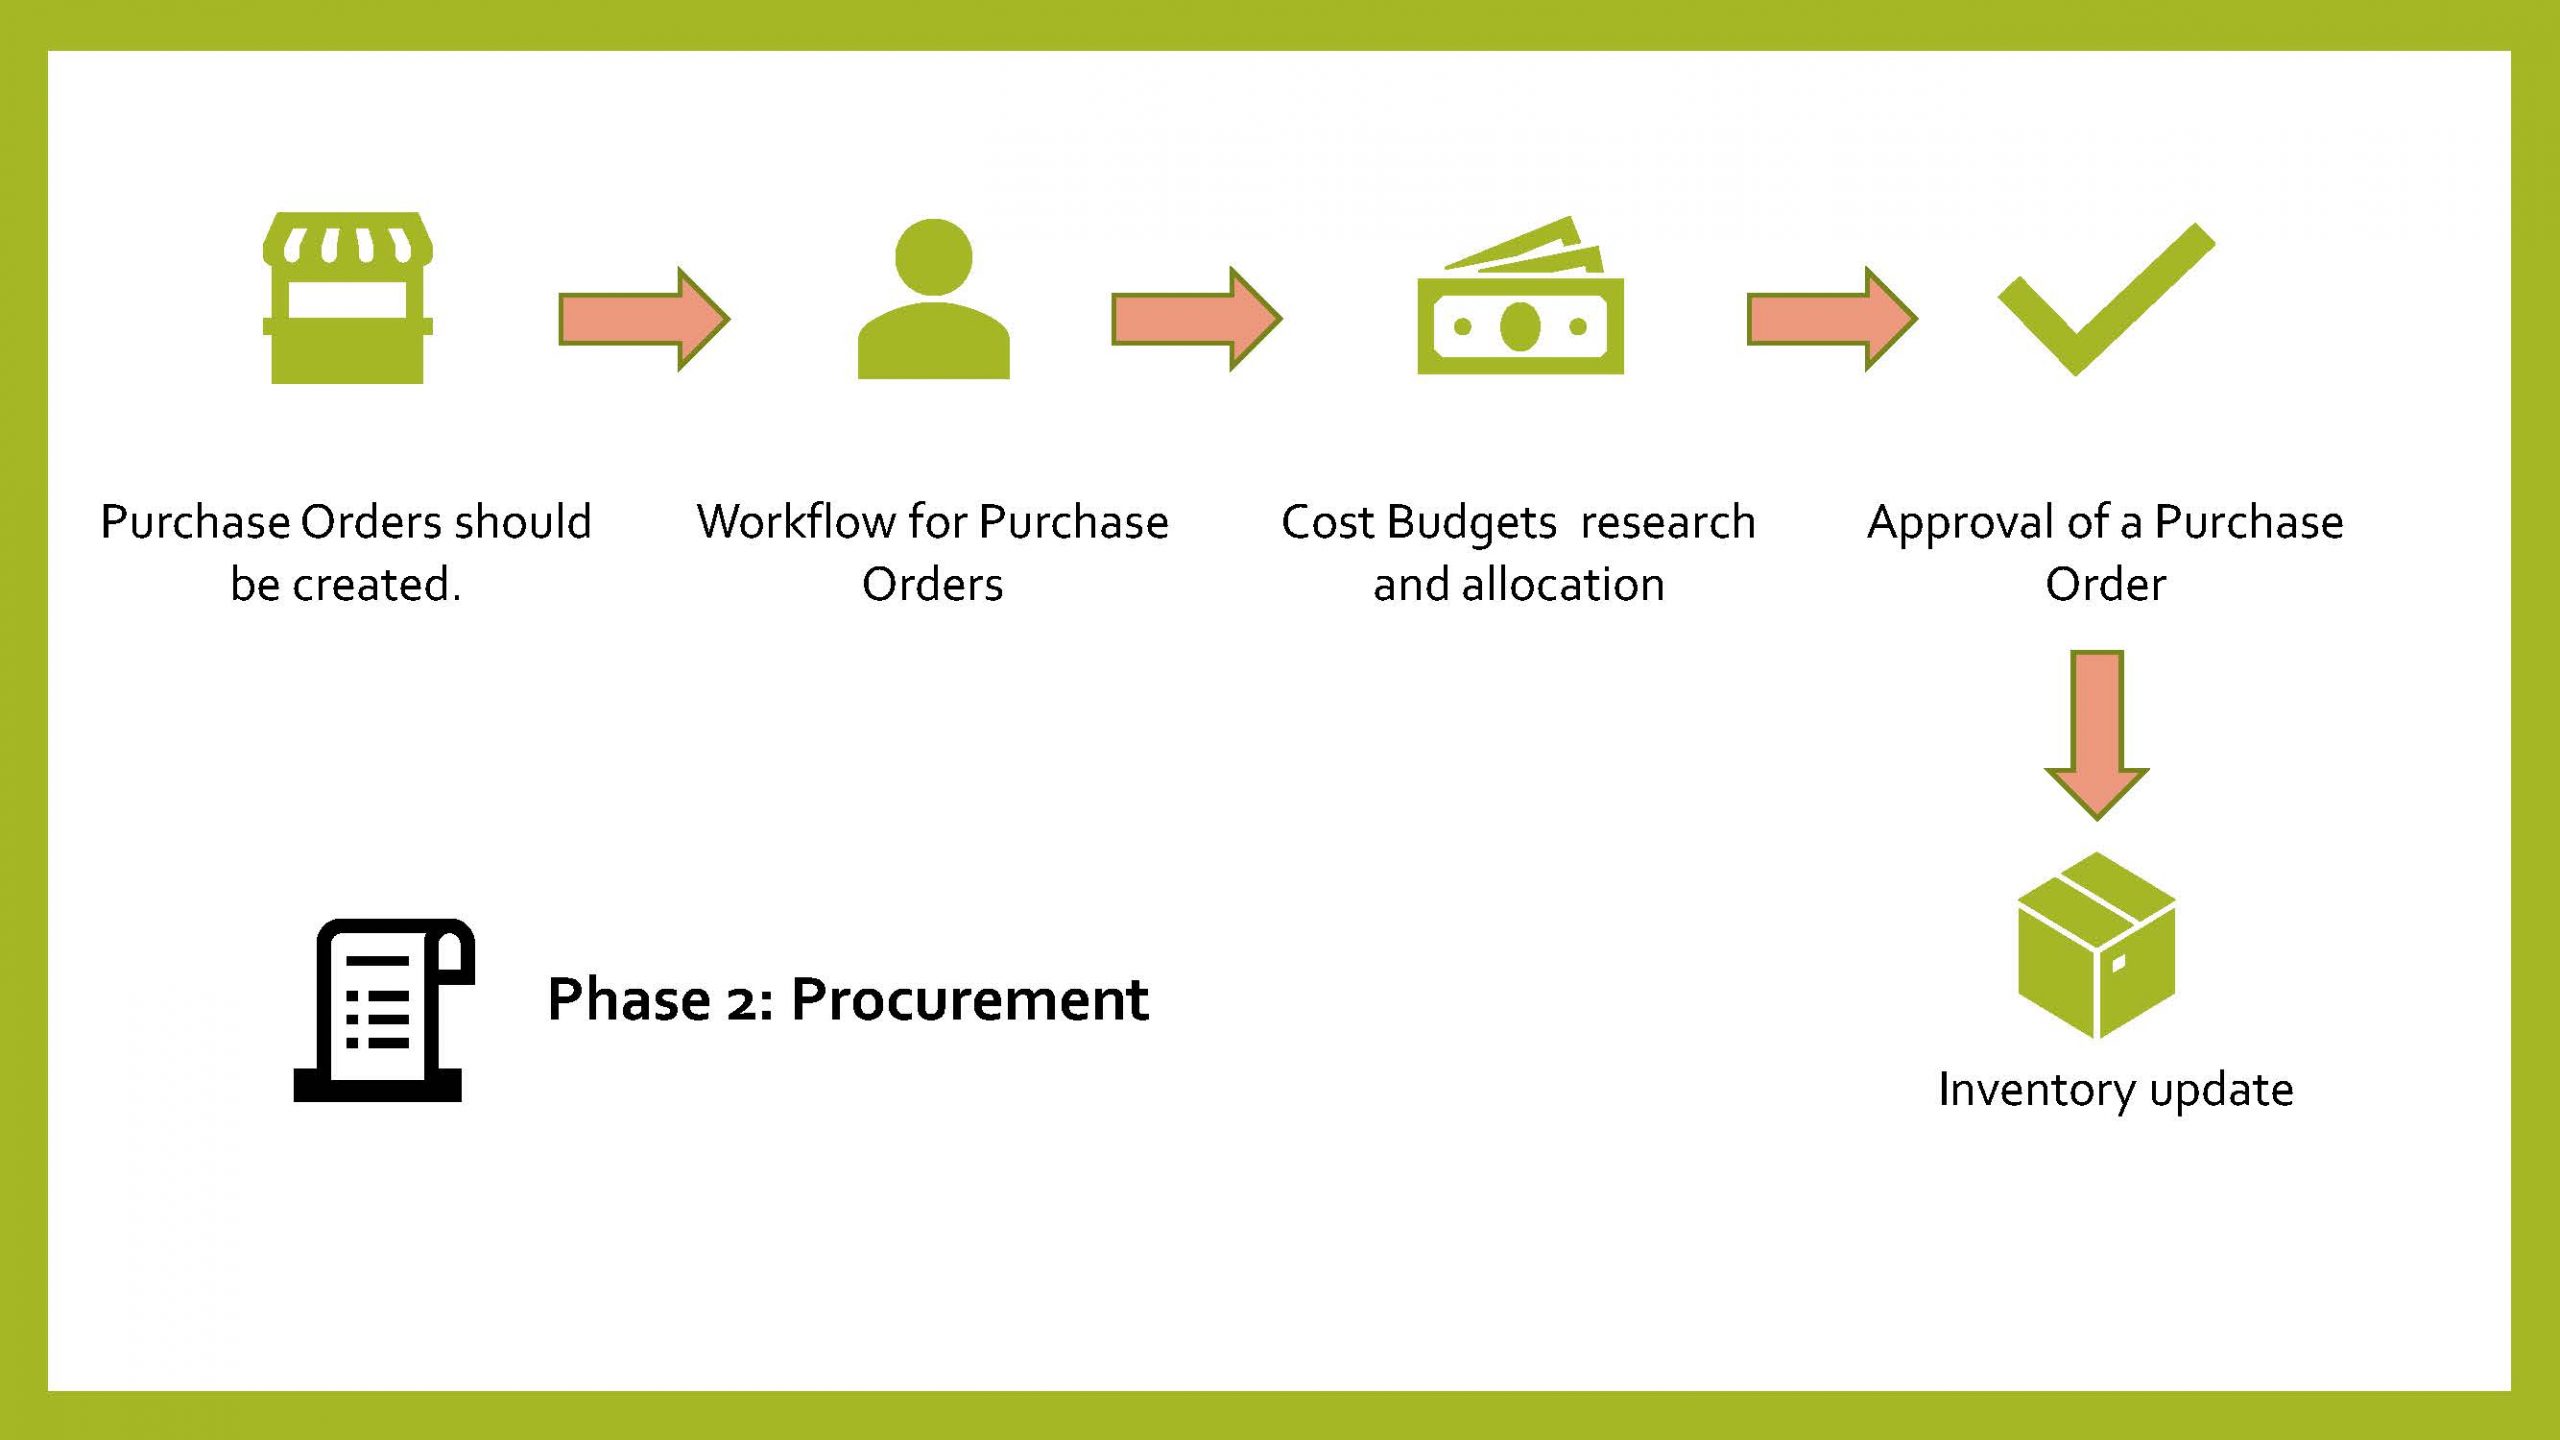 The image shows the second phase of asset management - procurement. The image is linear. Starting from the left, purchase orders should be created, then a workflow, then a budget. Then the purchase order is approved and the inventory updated.